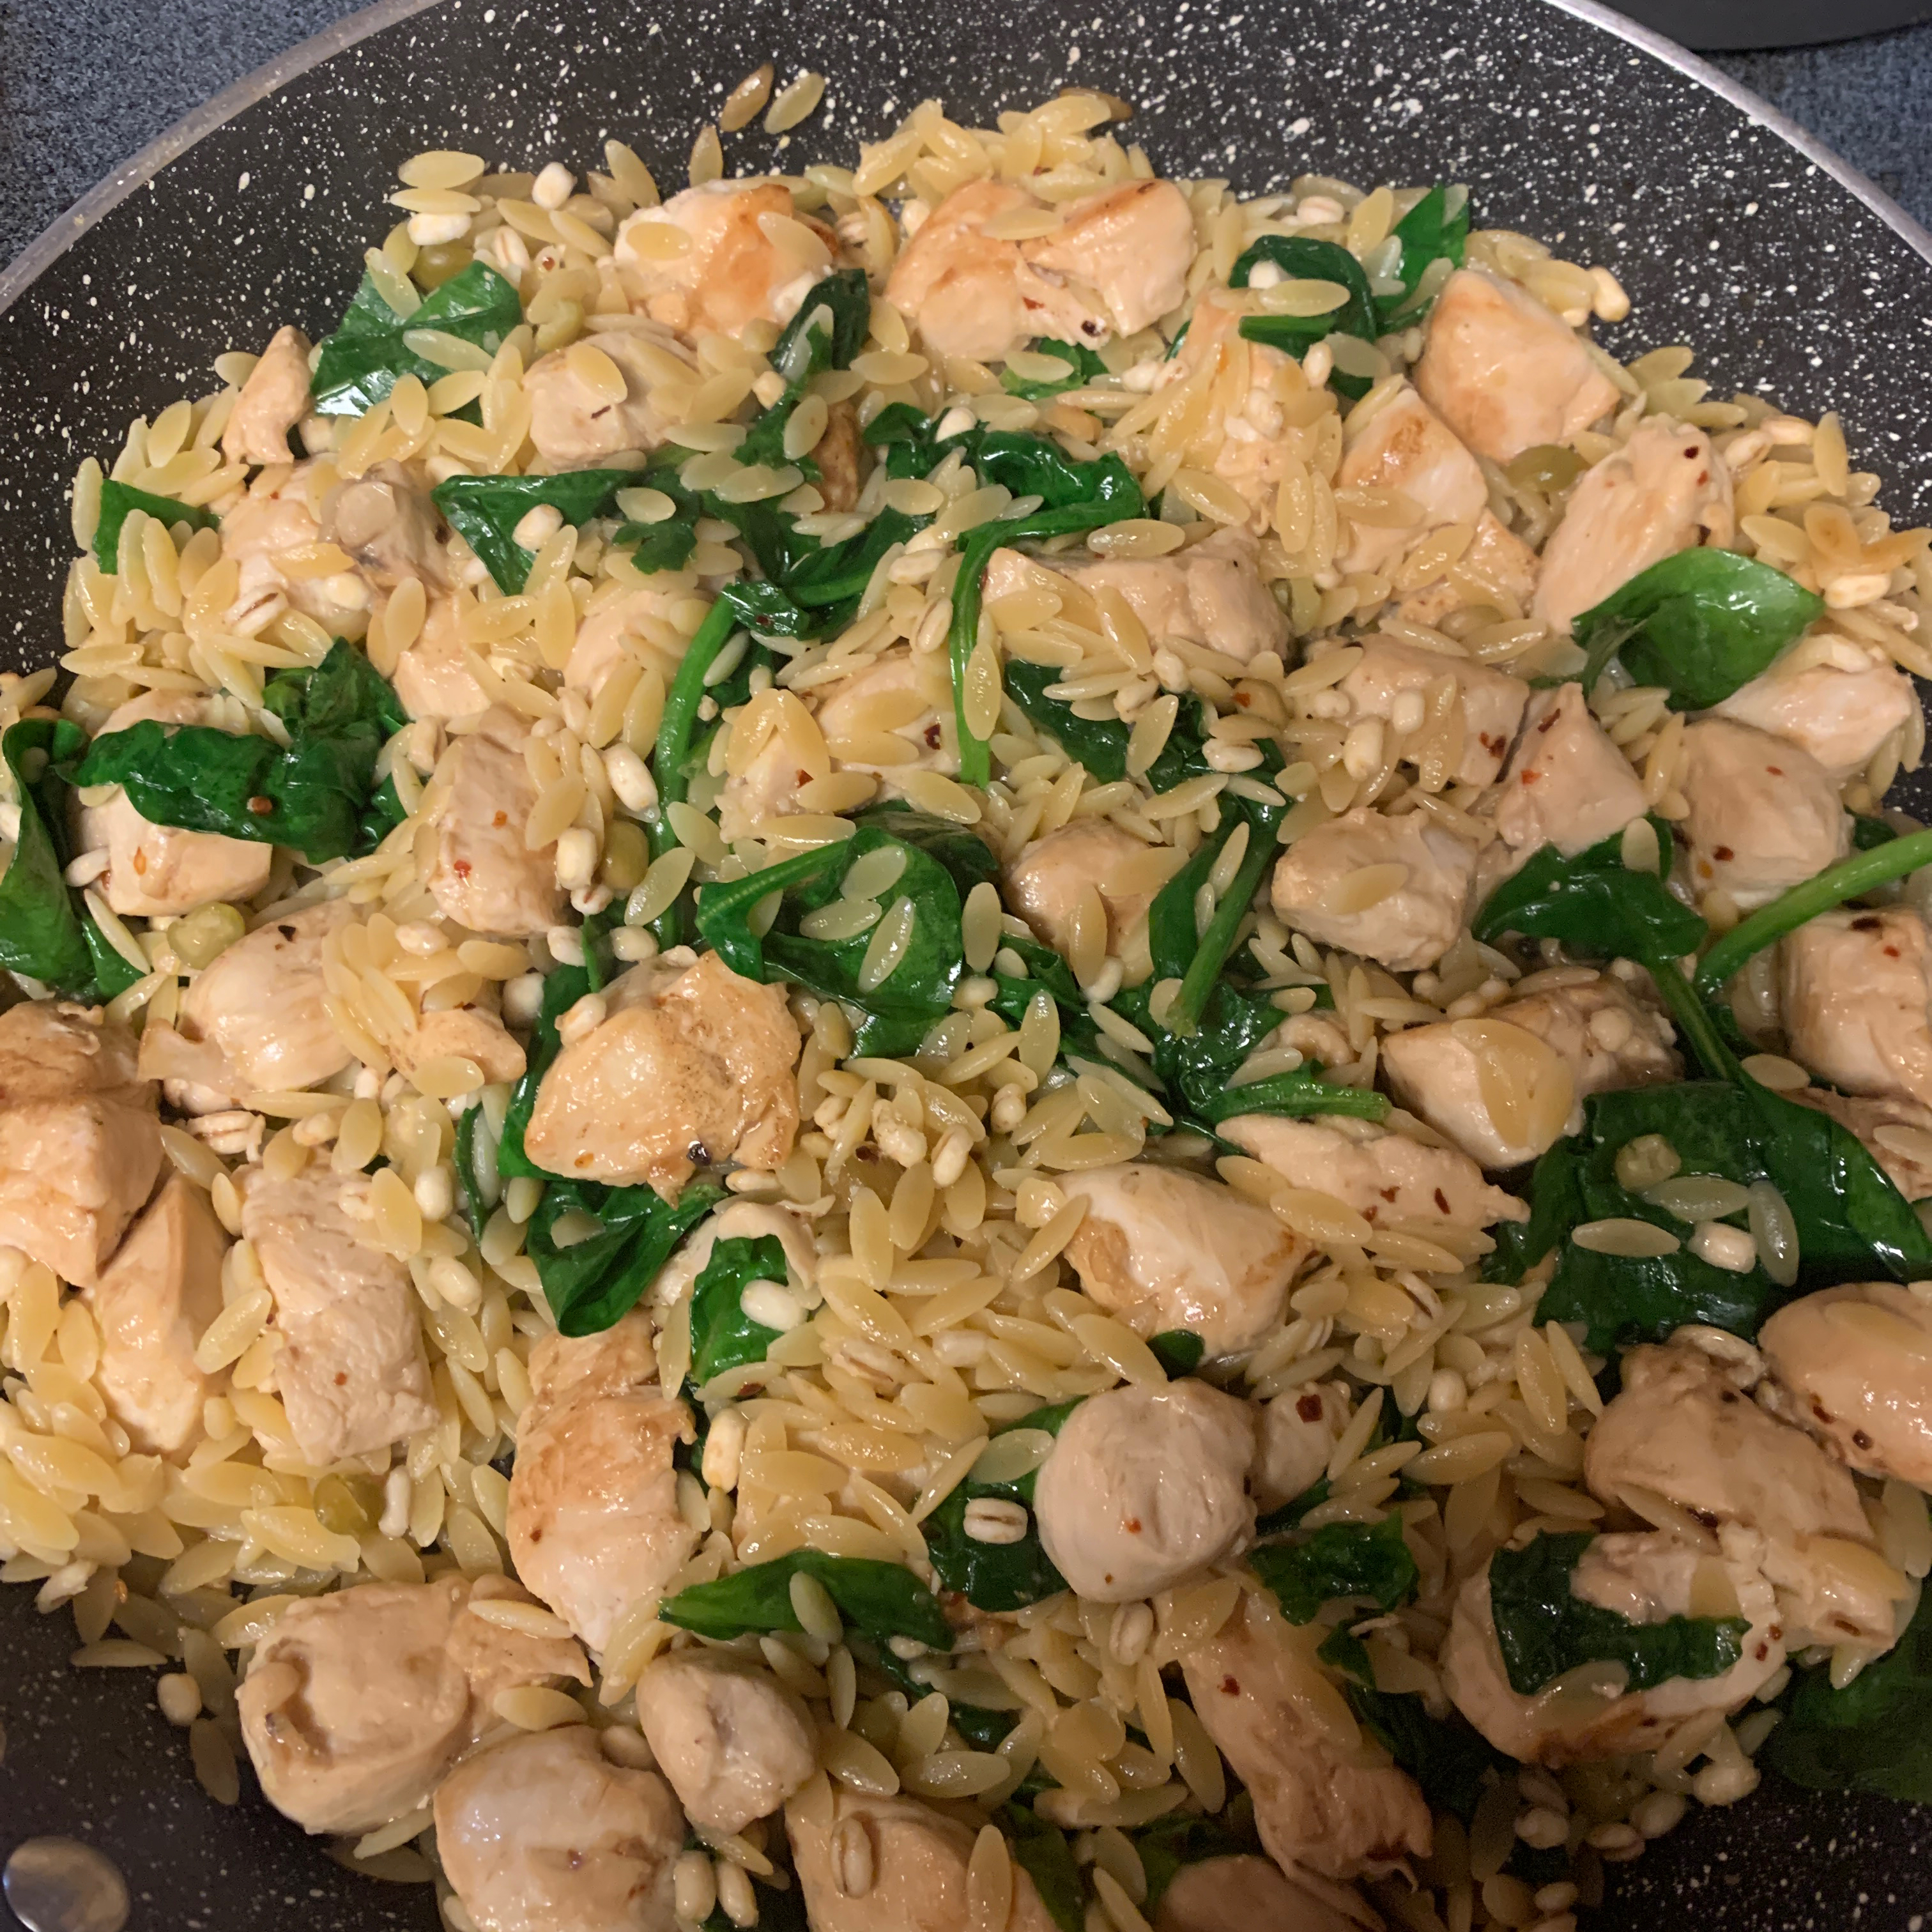 Garlic Chicken with Orzo Noodles tdhuyvetter